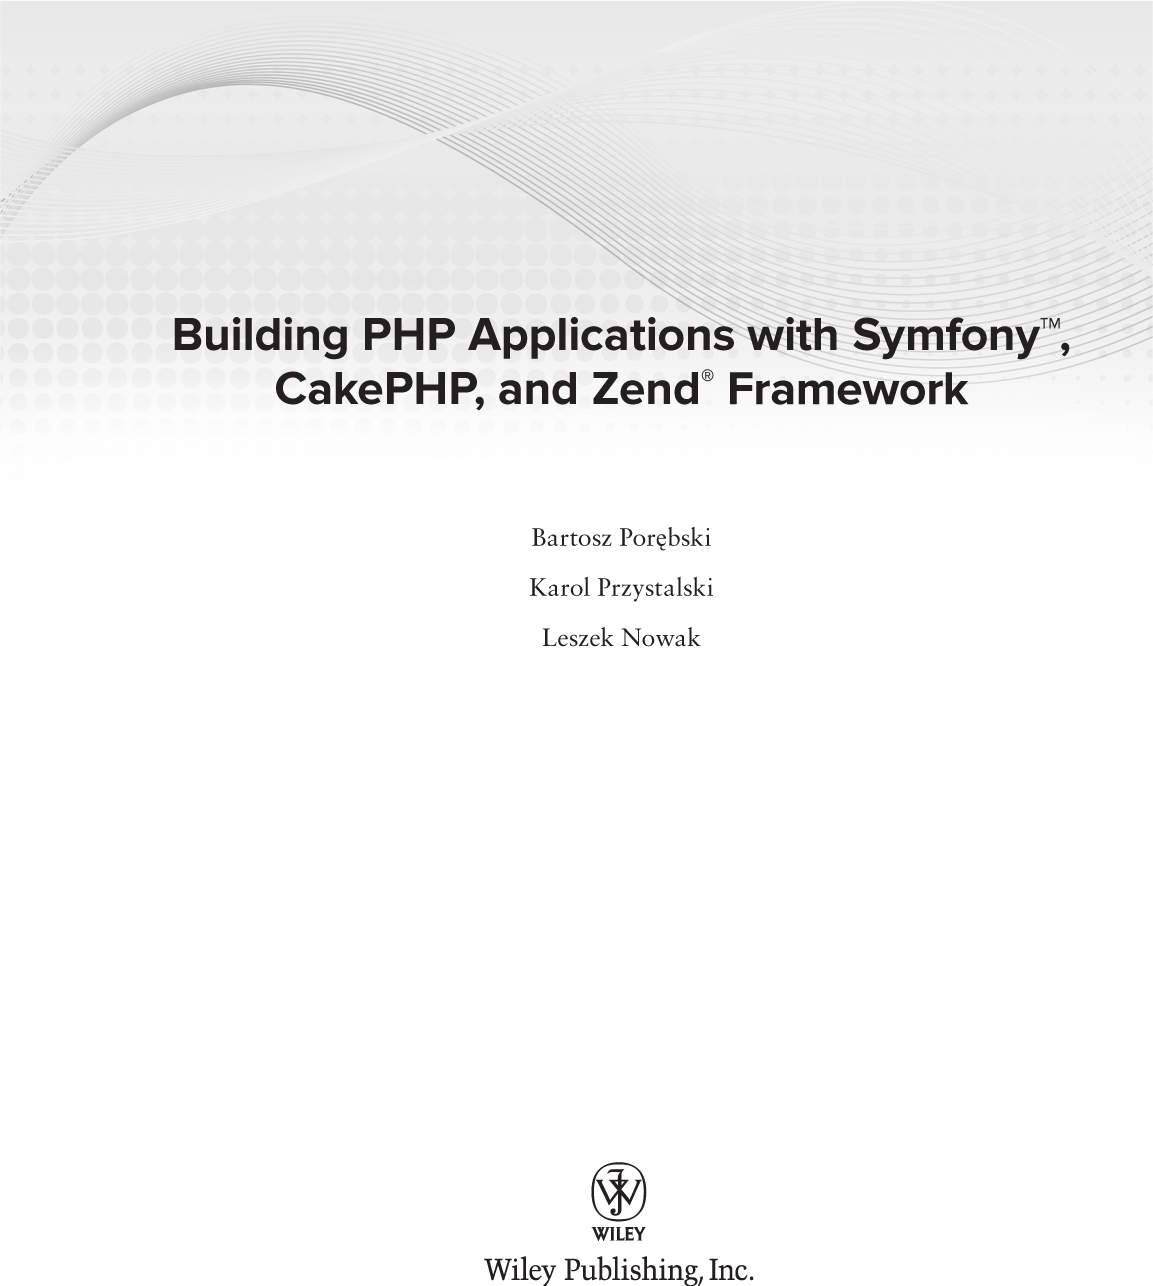 Building PHP Applications with Symfony CakePHP and Zend Framework - image 2